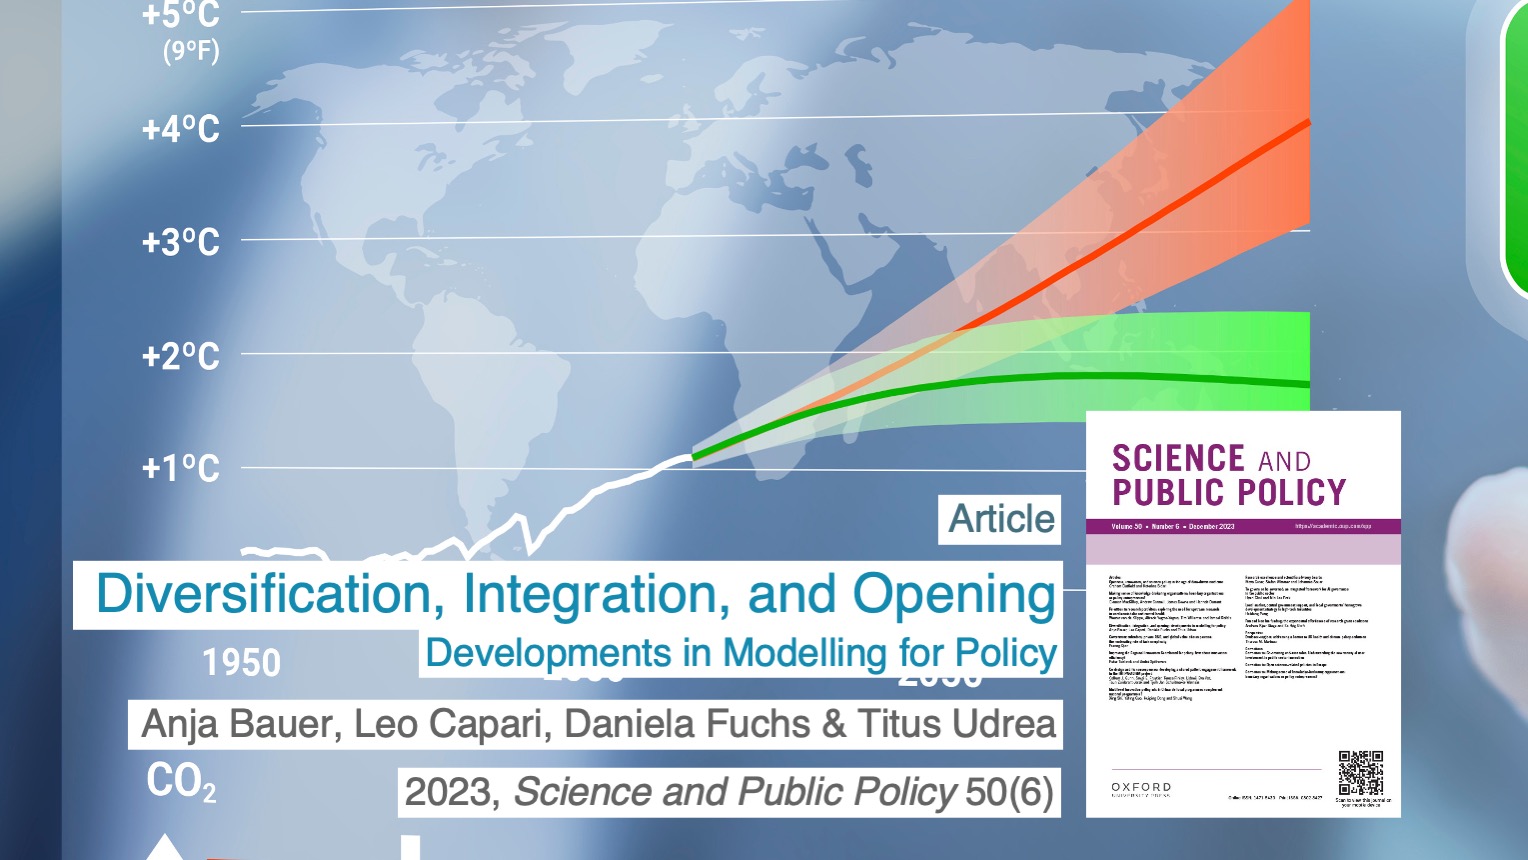 Anja Bauer, Leo Capari, Daniela Fuchs, Titus Udrea: Difersification, Integration, and Opening. Developments in Modelling for Policy. 2023, Science and Public Policy 50(6).